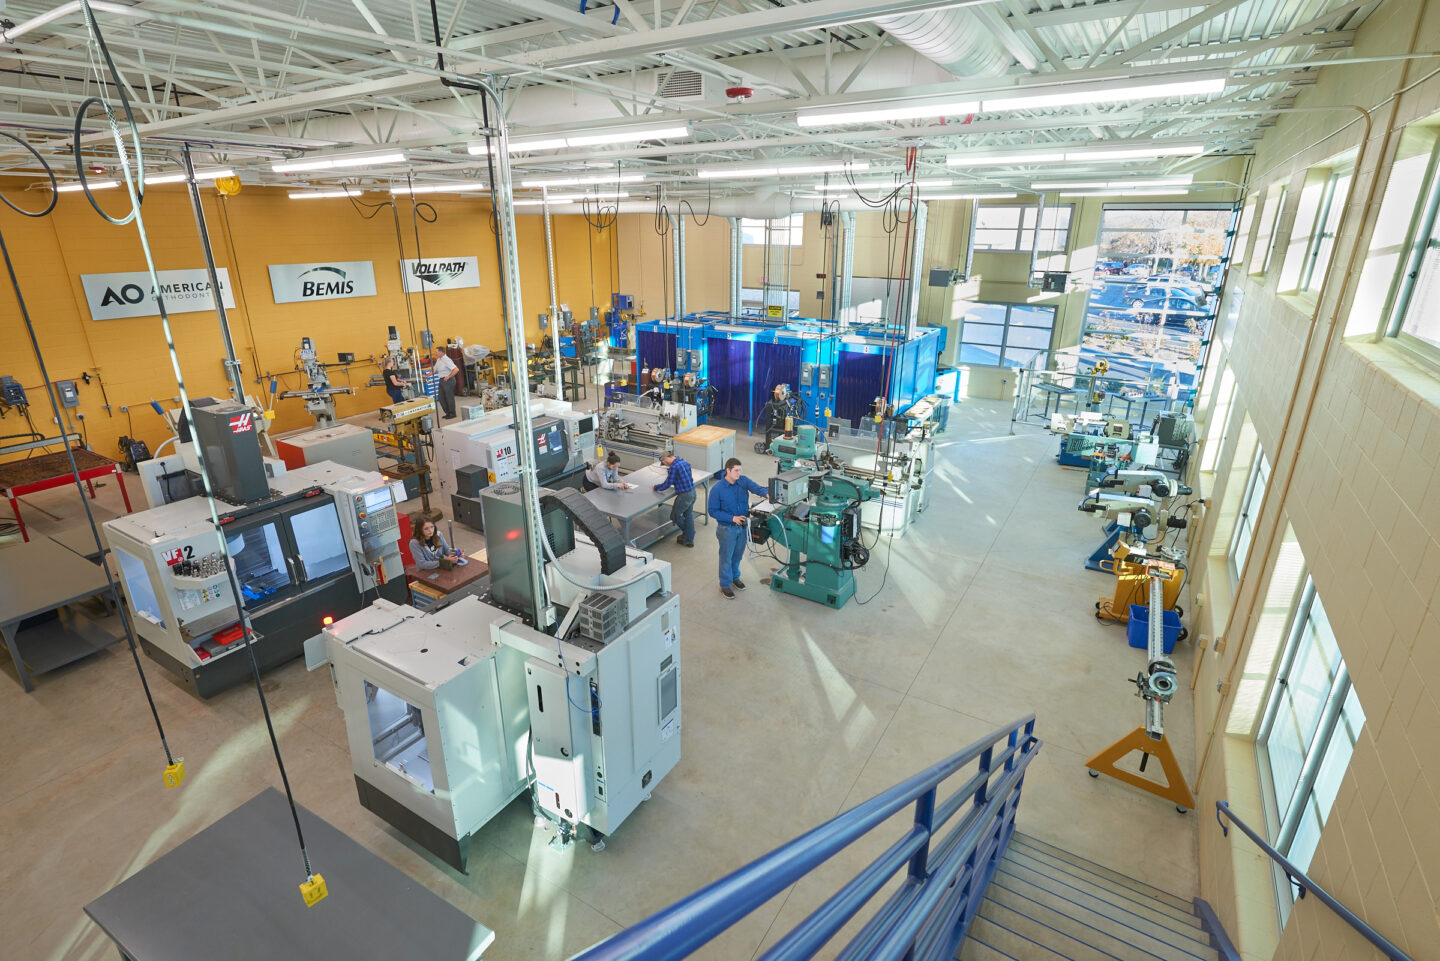 A view from the mezzanine of an active, well equipped manufacturing training room with ample windows at Sheboygan North High School